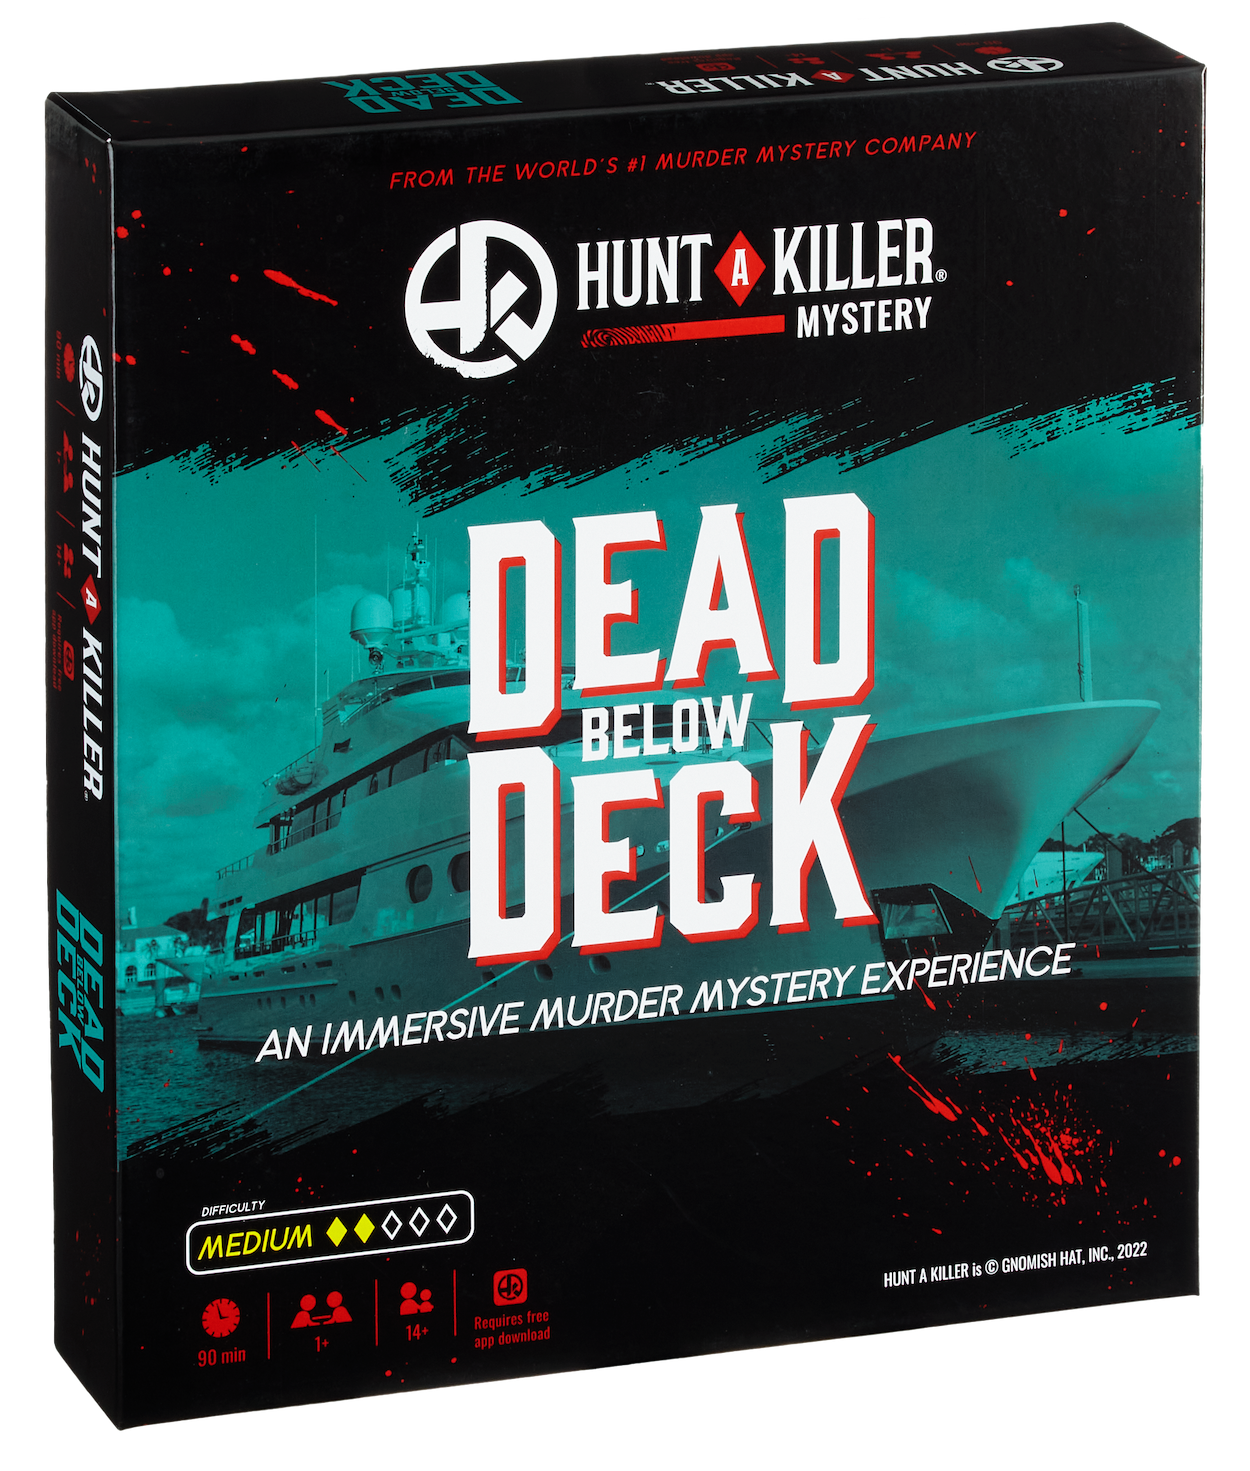 Hunt A Killer introduces Dead Below Deck, all-in-one box murder mystery game